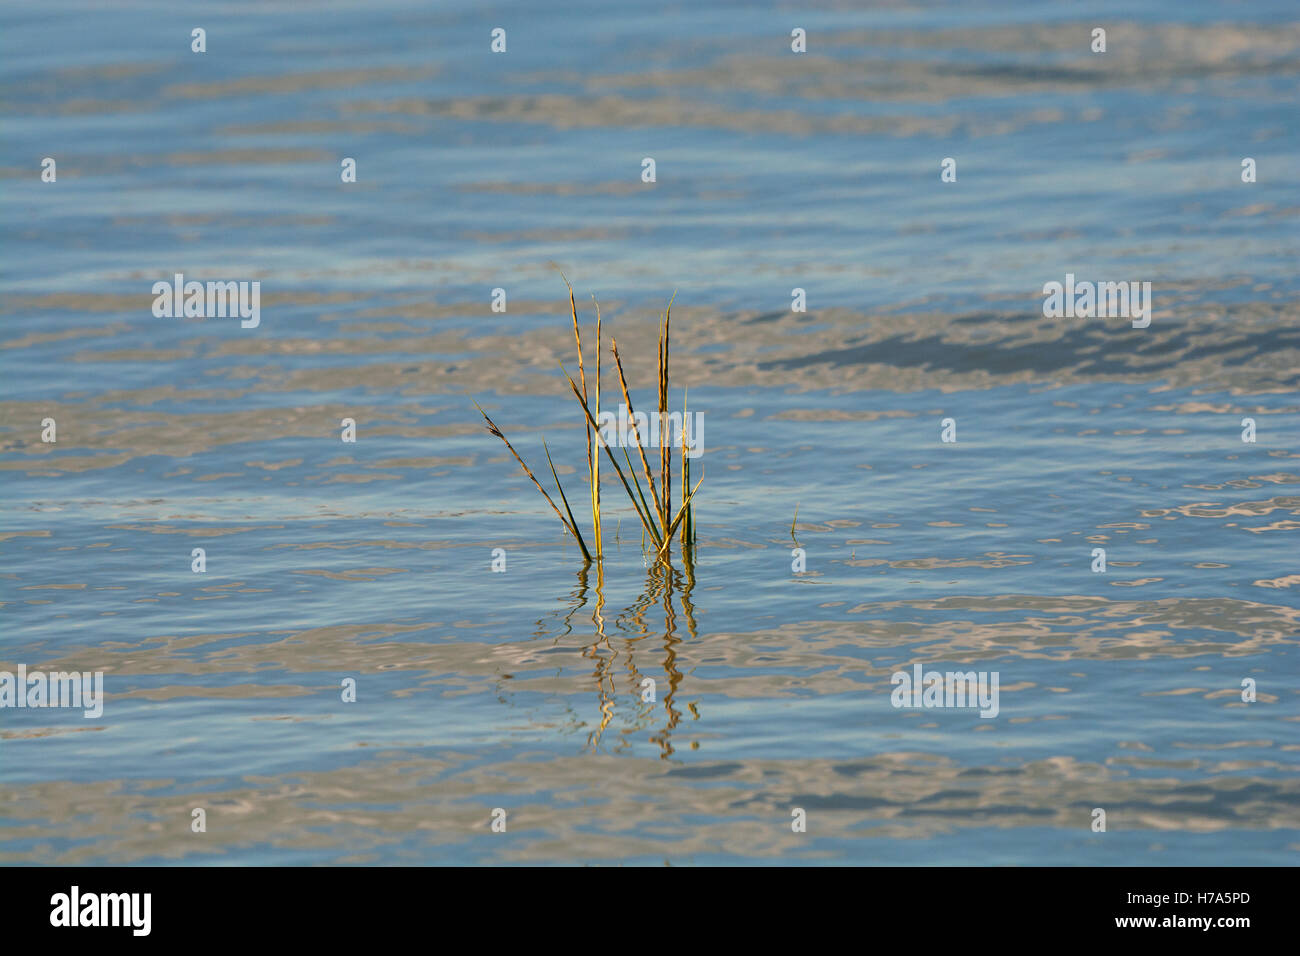 Cordgrass, Spartina alterniflora, protruding out of water at high tide in Morecambe Bay, Lancashire, UK Stock Photo